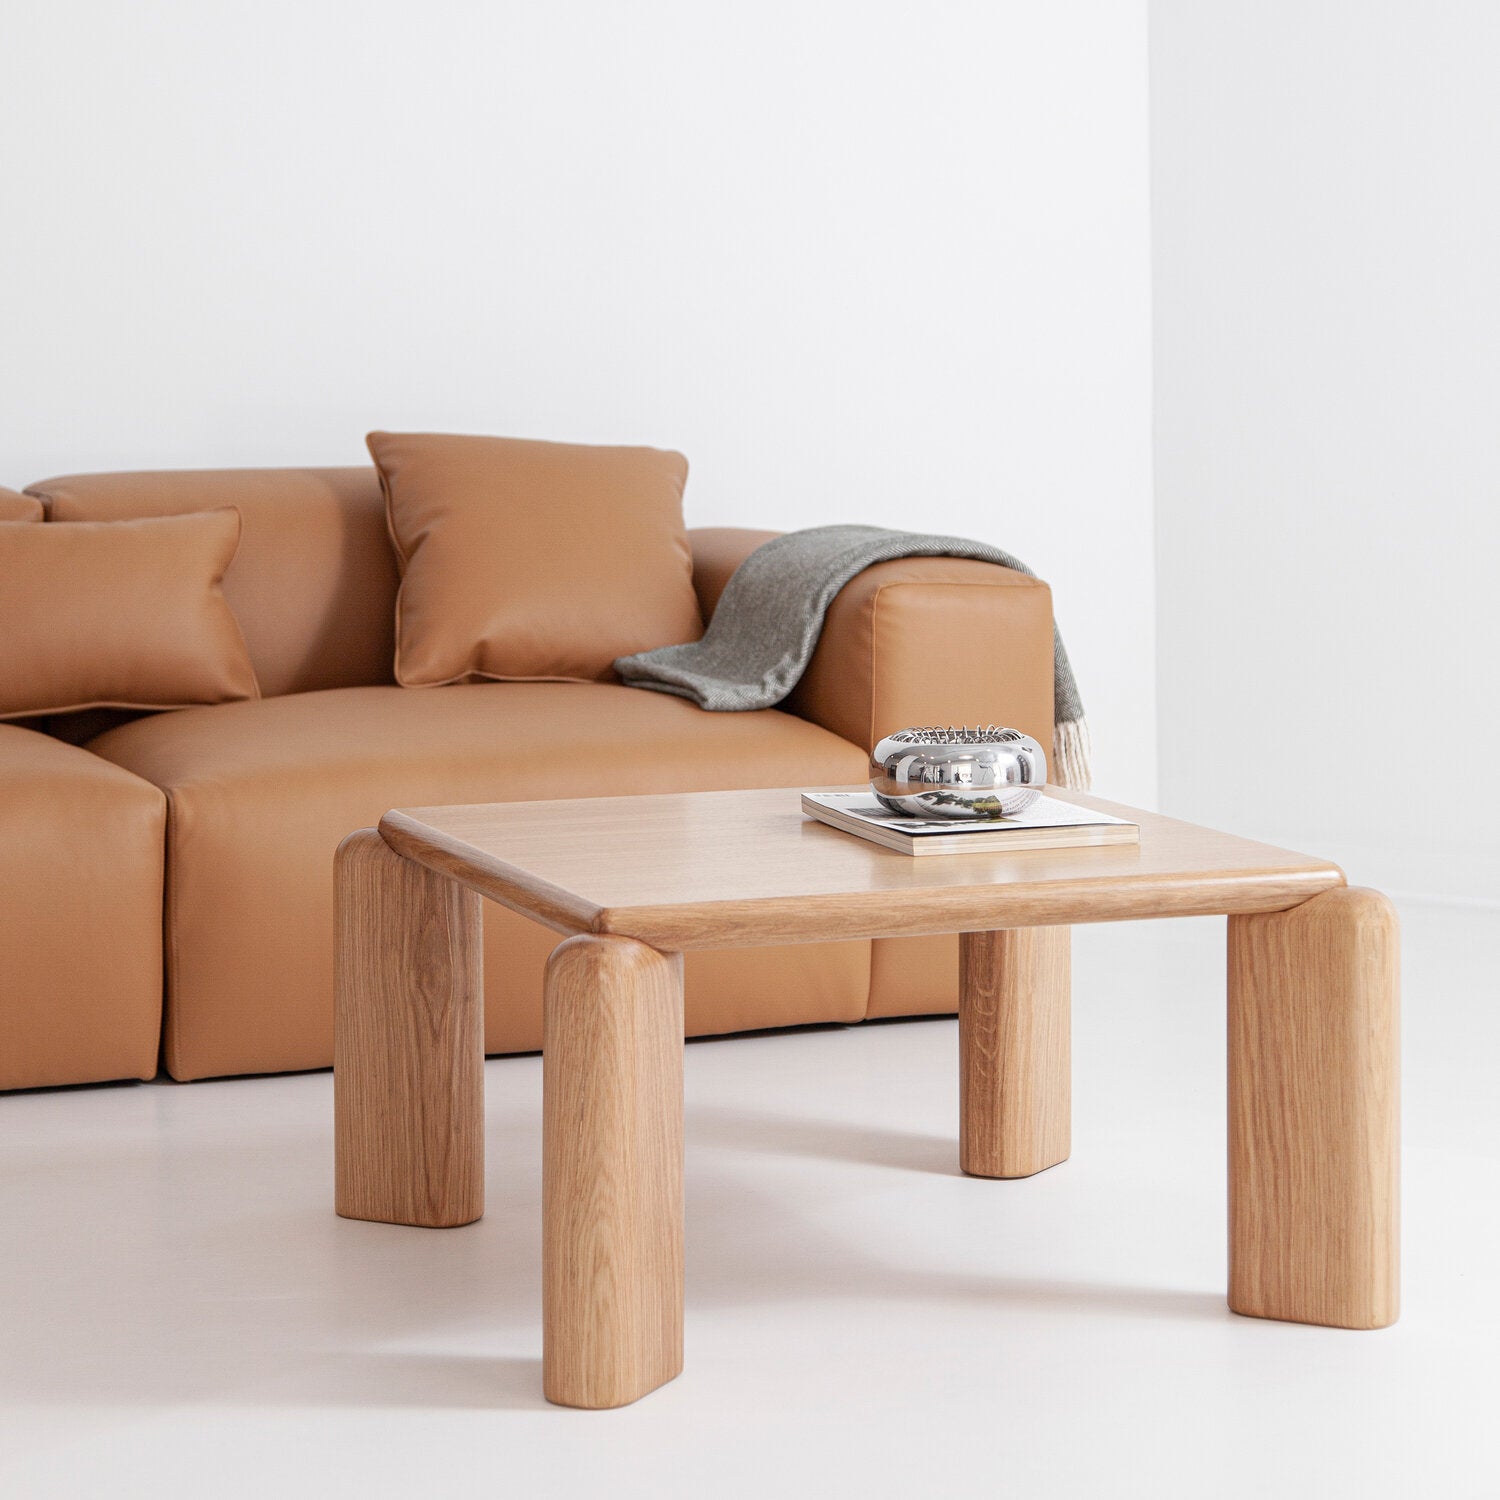 Soften Coffee Table - THAT COOL LIVING